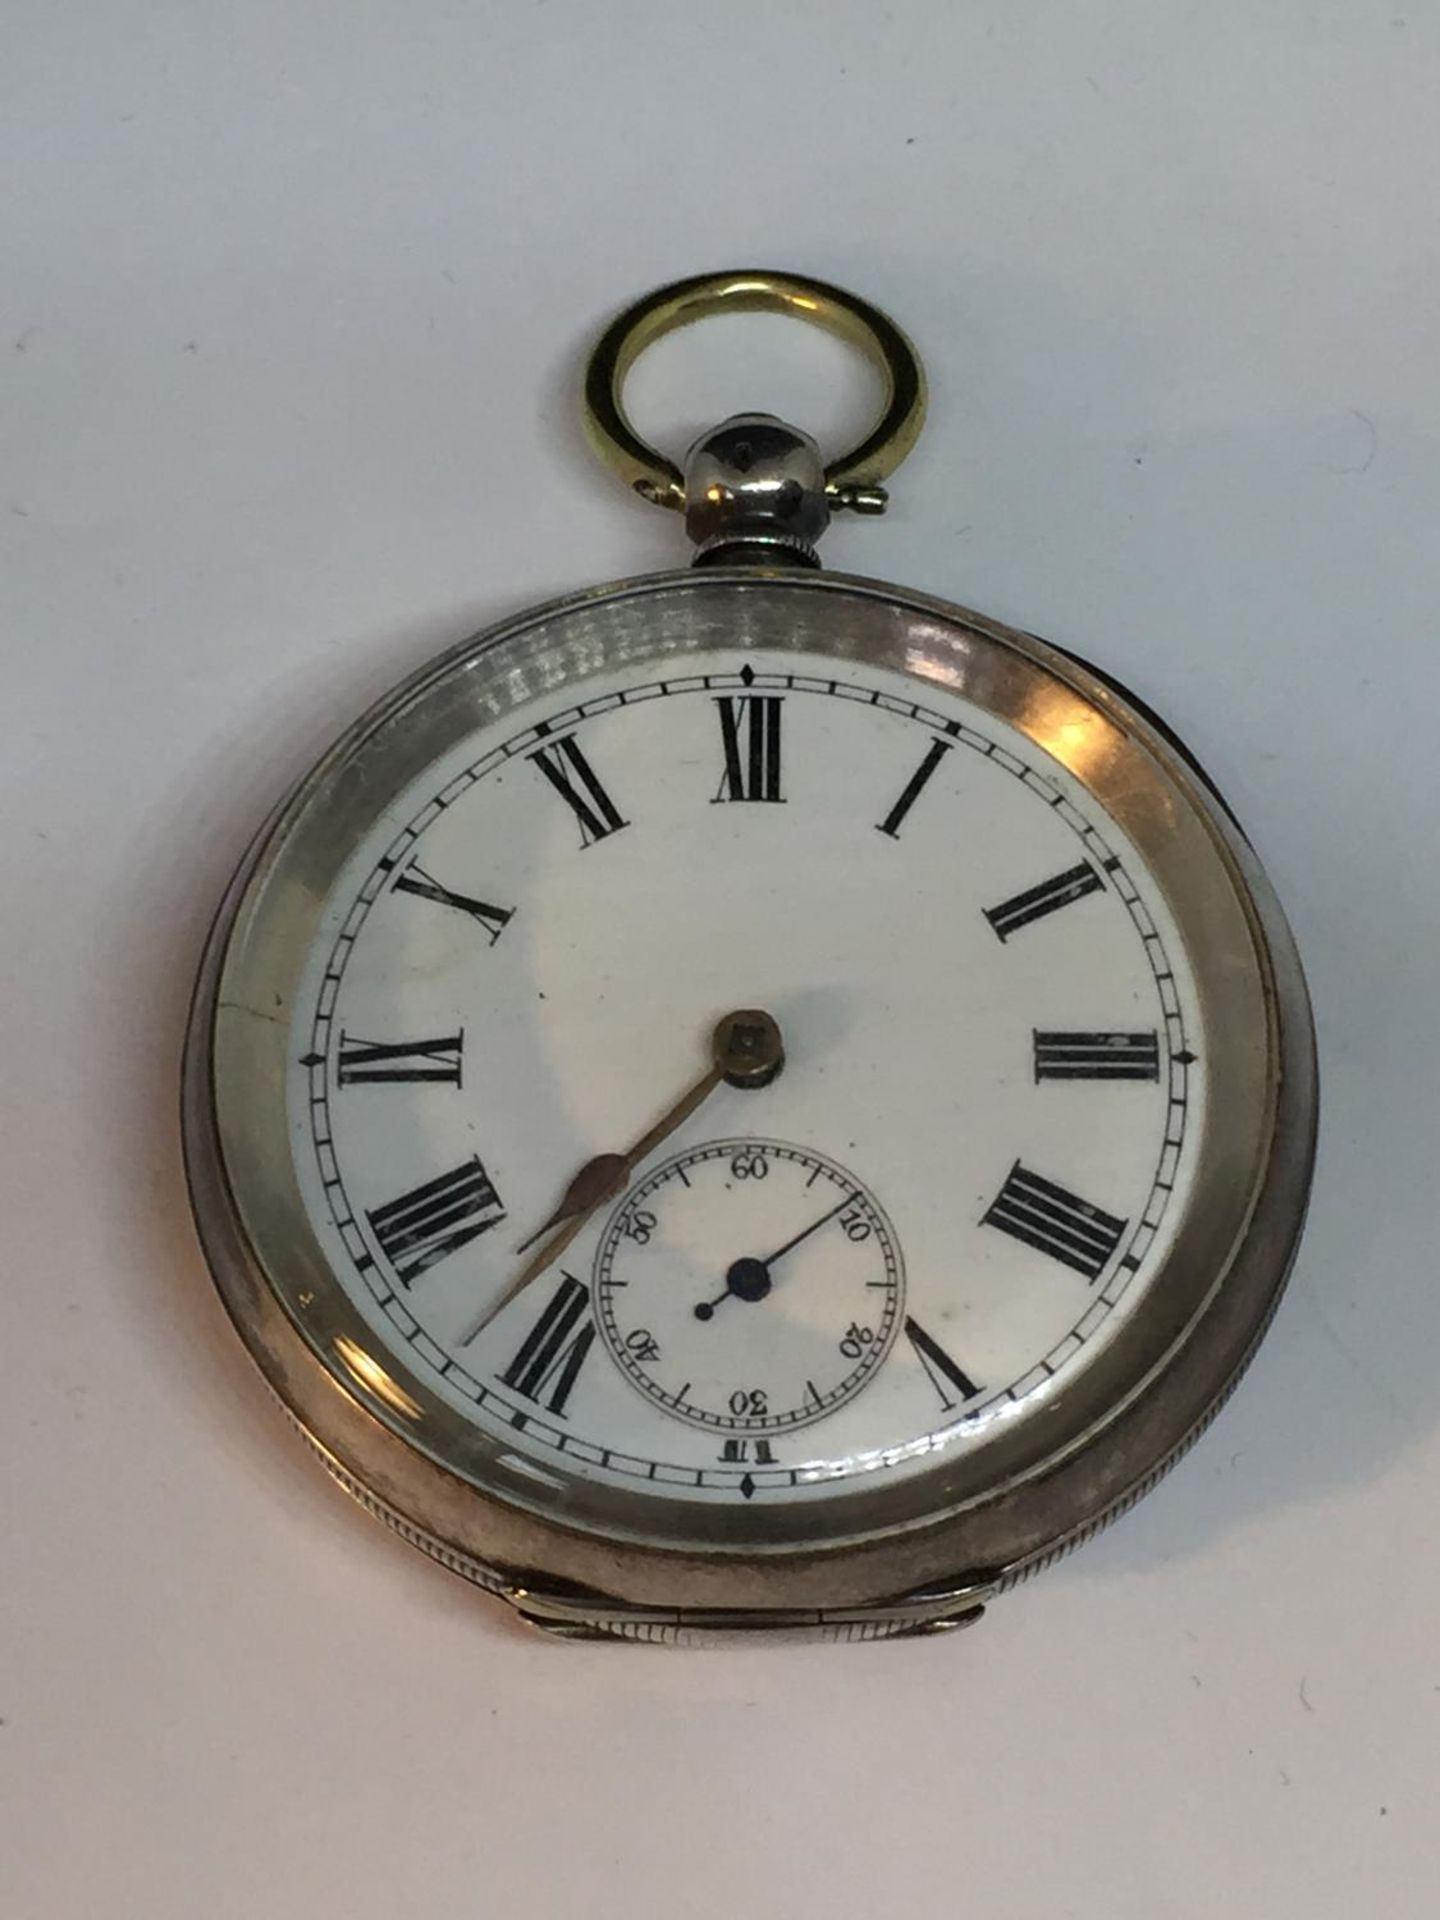 A MARKED 935 SILVER POCKET WATCH SEEN WORKING BUT NO WARRANTY GIVEN